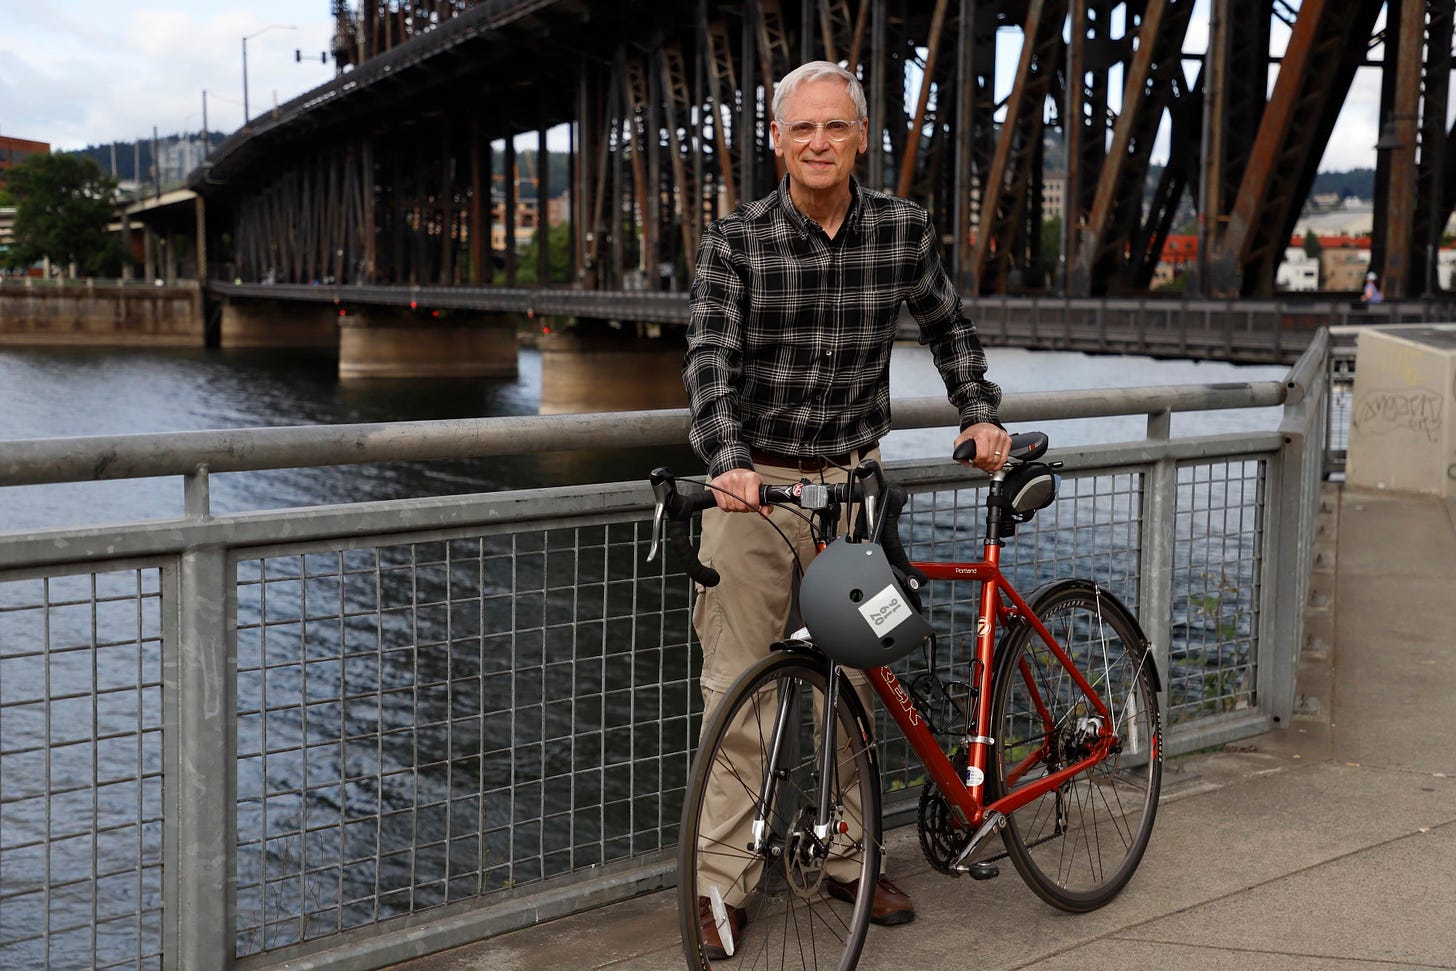 The Congressman standing with his red bike by a river and a bridge.